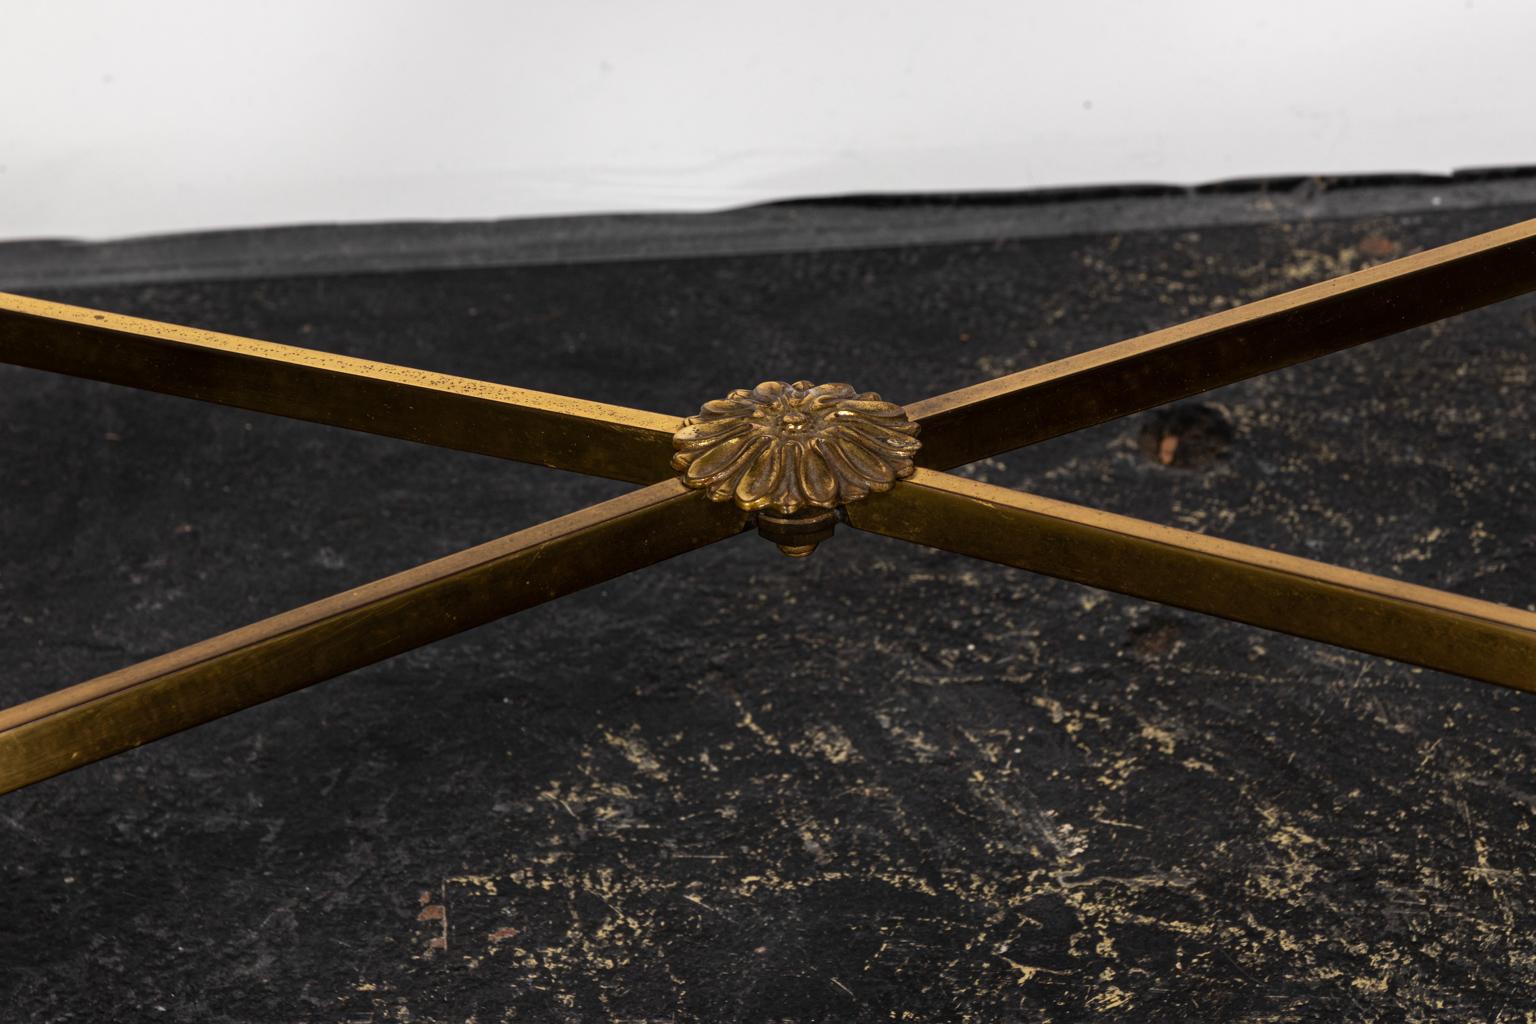 Brass and glass etched coffee table with foliage trim on the table top and X-shaped cross stretcher. Please note of wear consistent with age including minor paint loss.